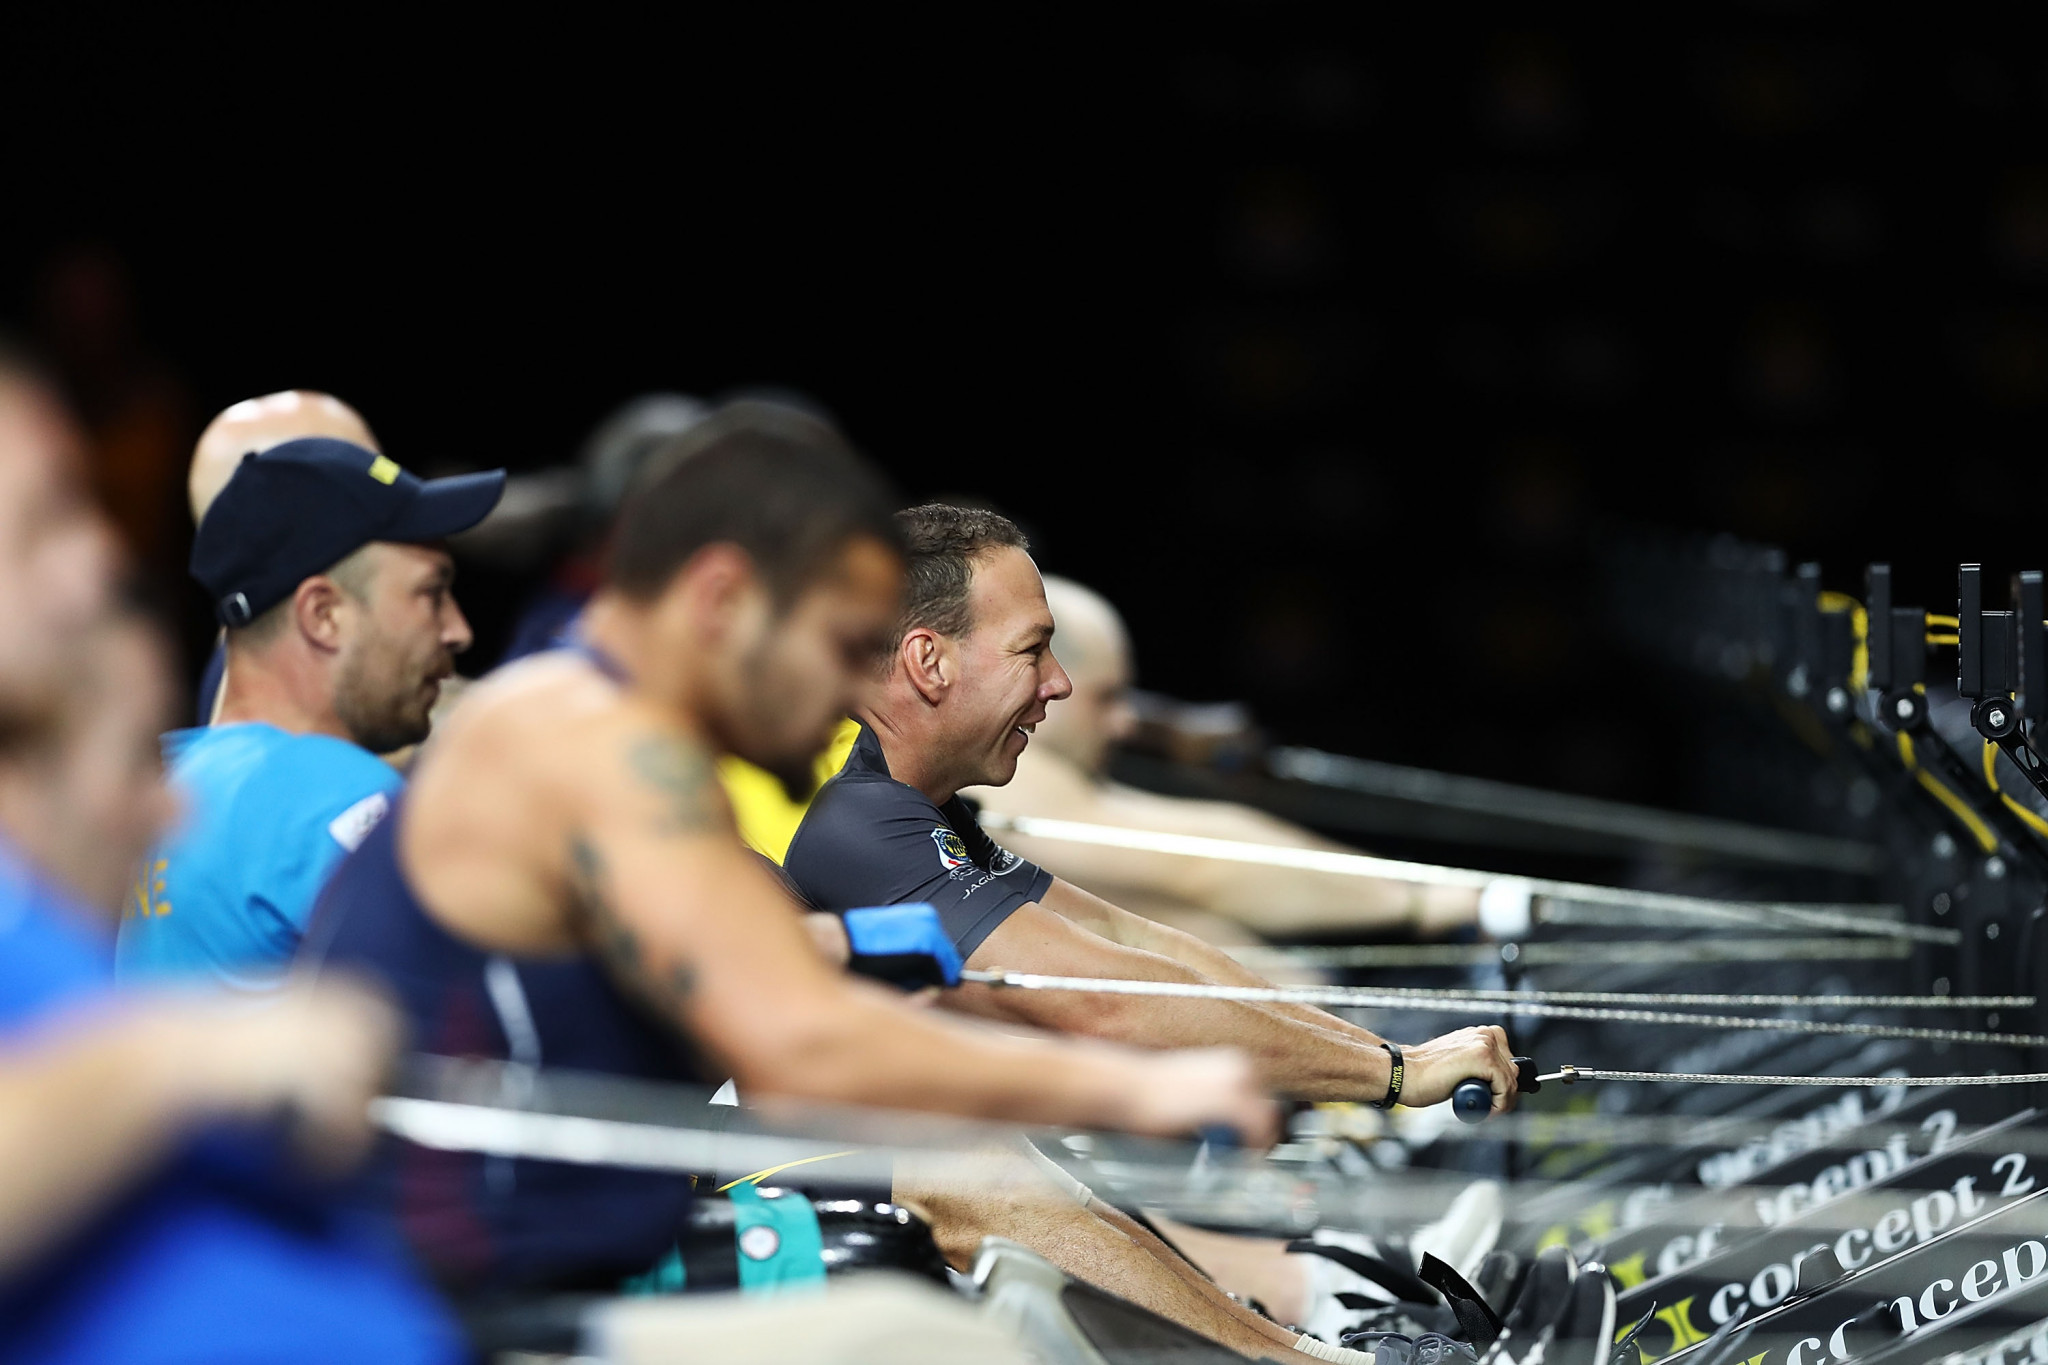 The World Rowing Virtual Indoor Championships will take place at the end of February ©Getty Images